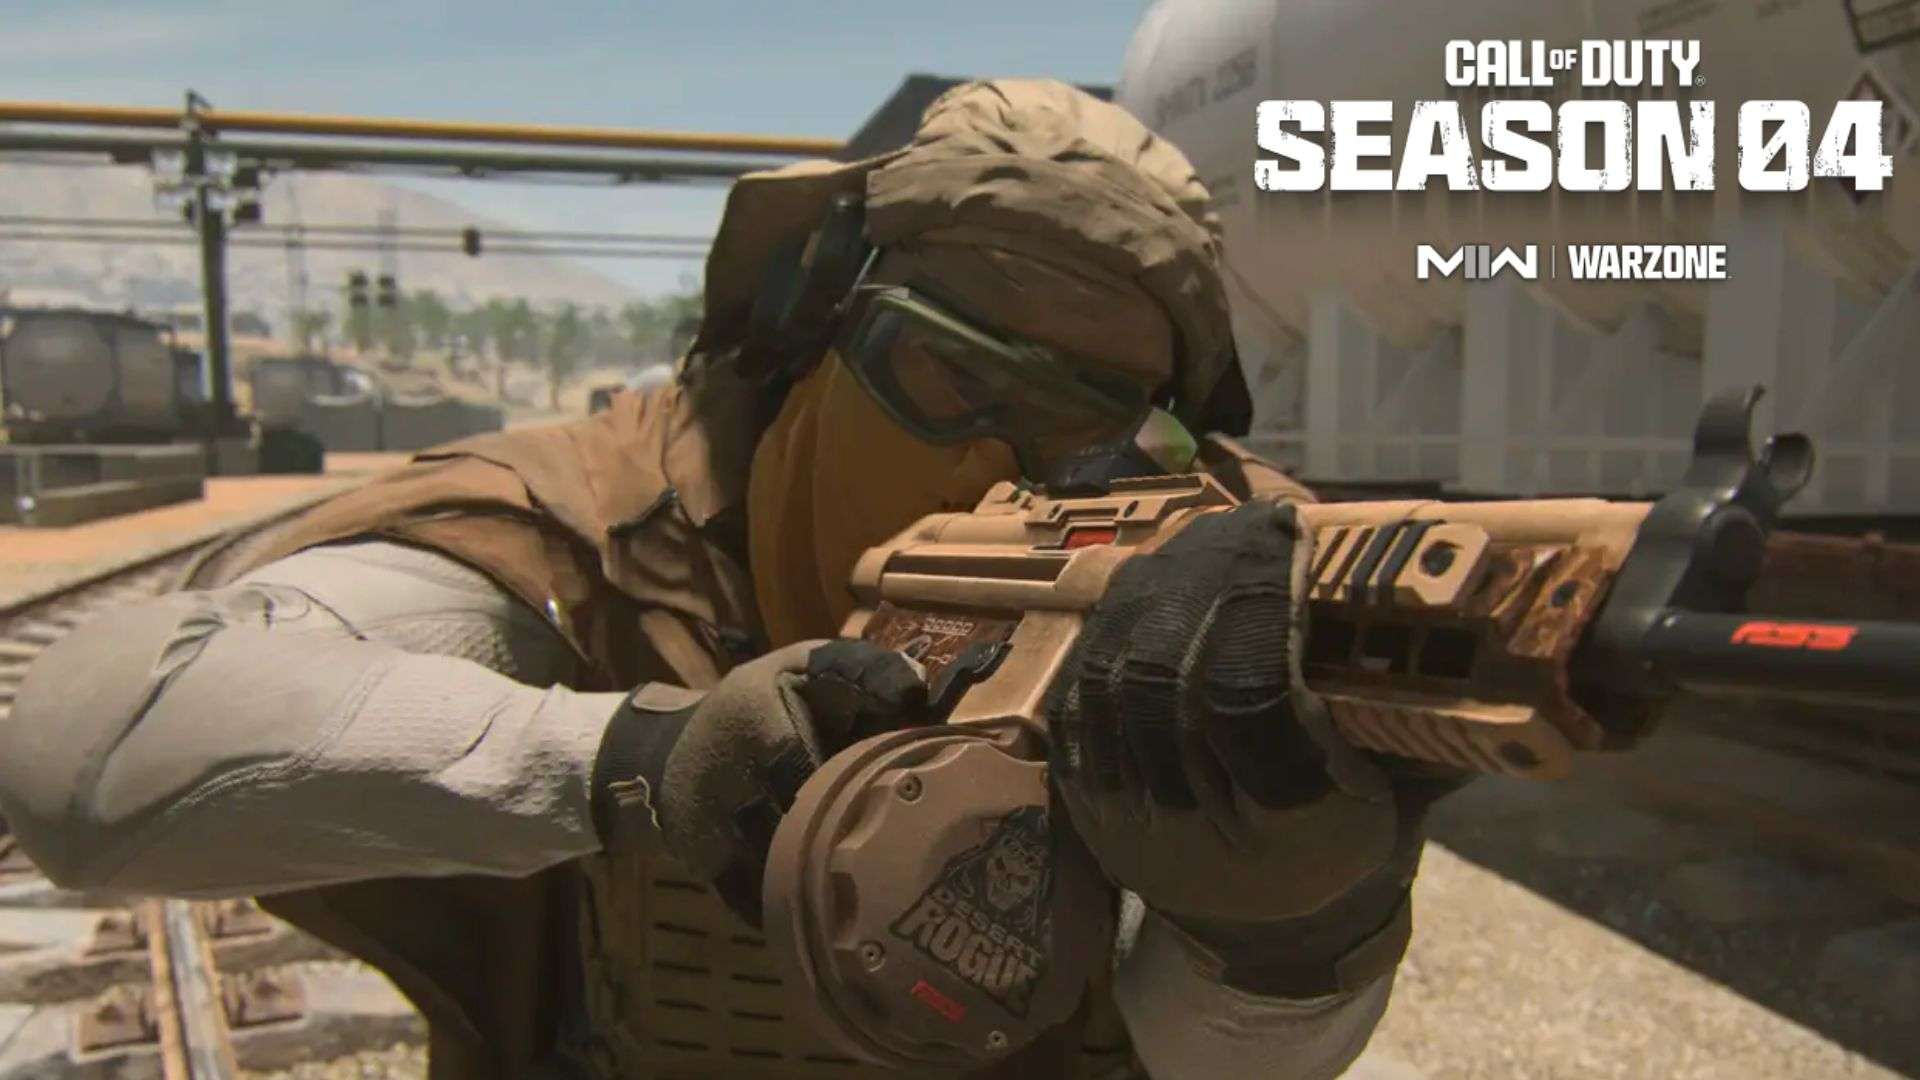 Warzone 2 operator aiming LMG at player in desert setting